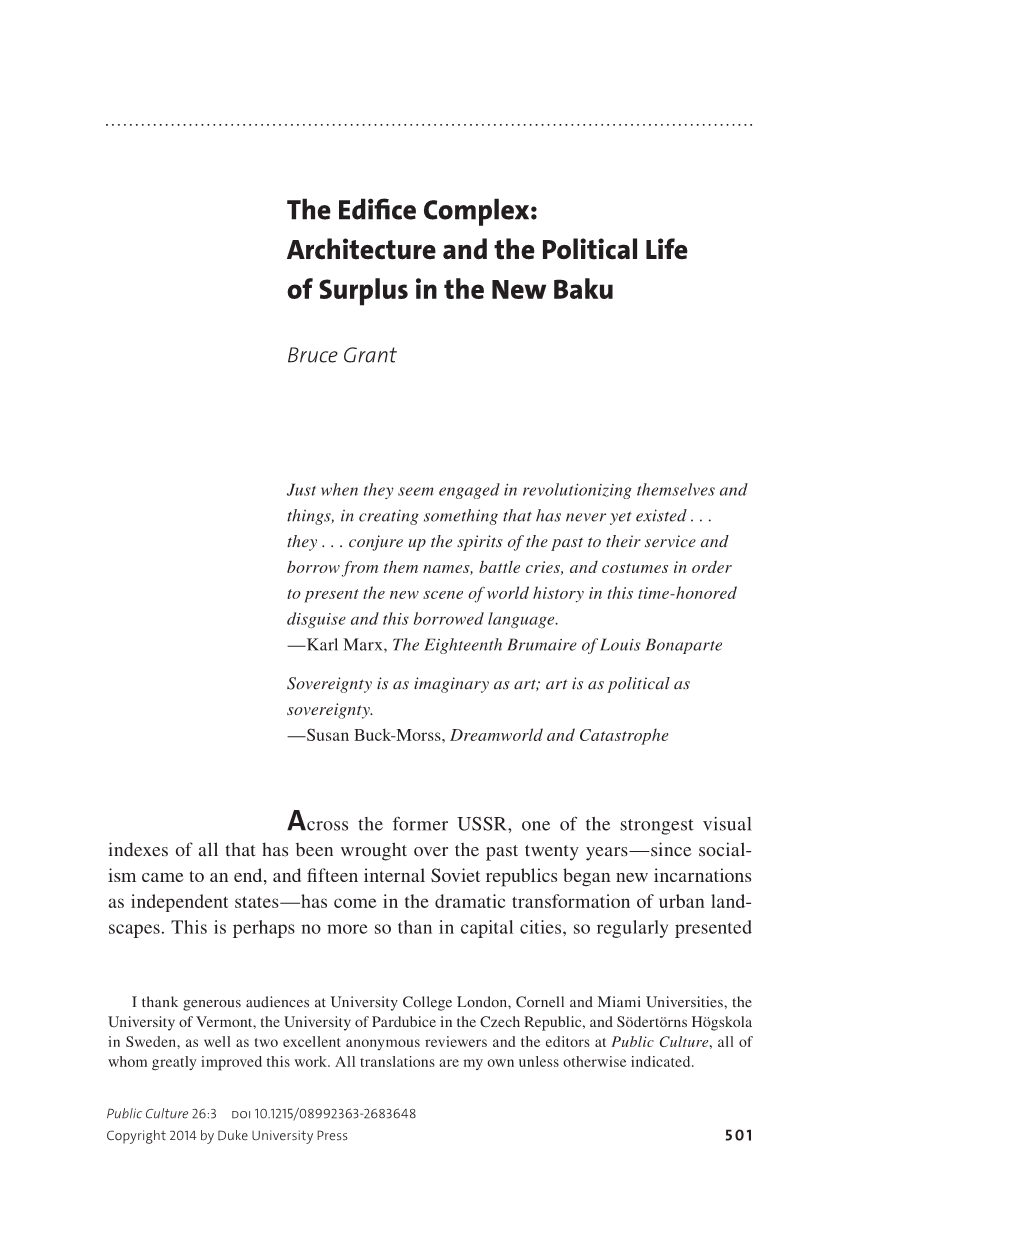 The Edifice Complex: Architecture and the Political Life of Surplus in the New Baku